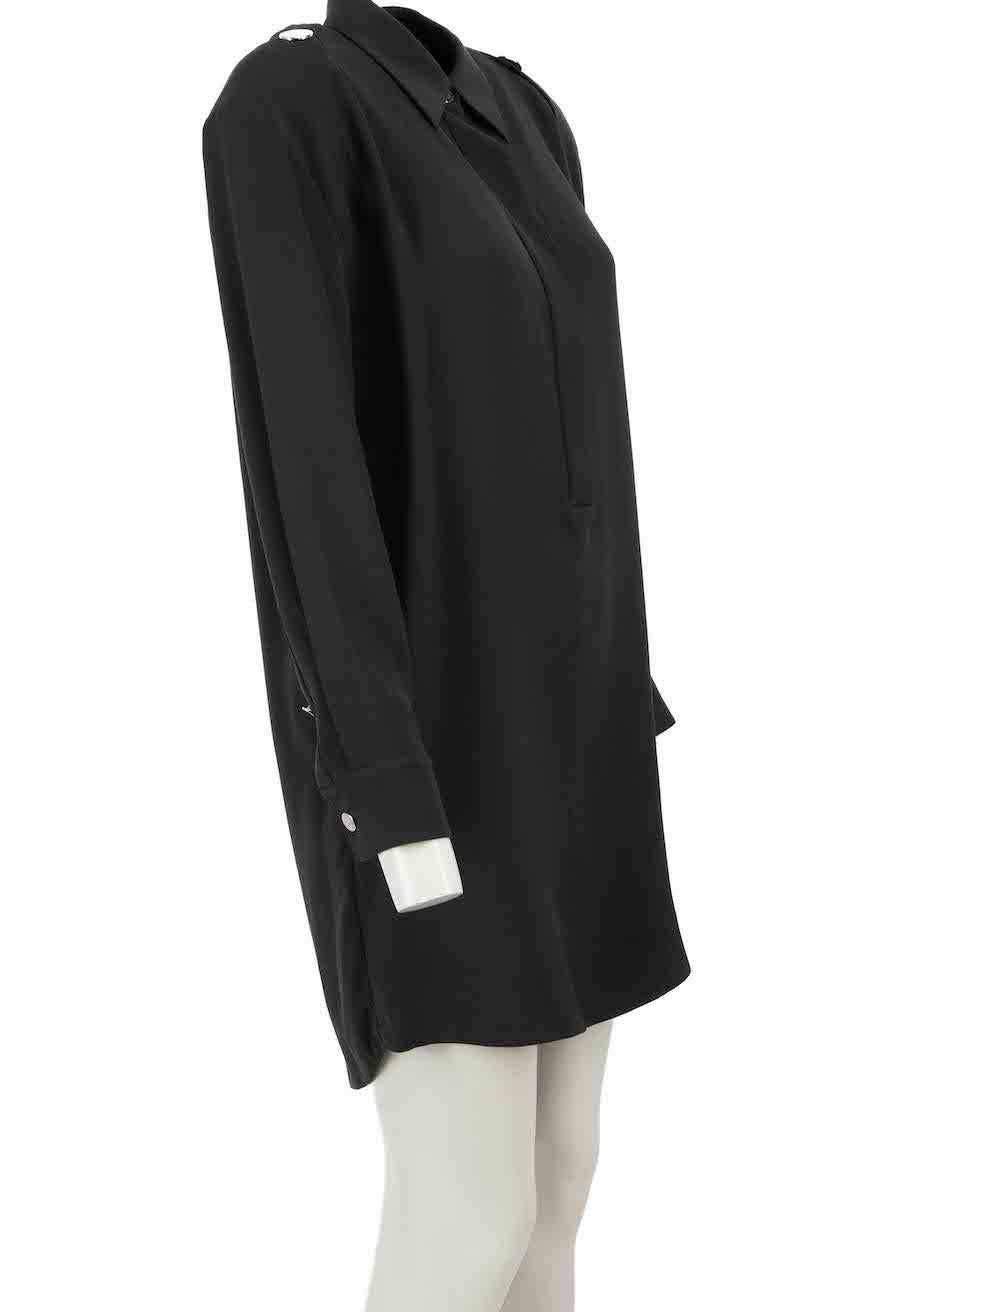 CONDITION is Very good. Hardly any visible wear to dress beyond one or two negligible plucks to the weave is evident on this used Alexander Wang designer resale item.

Details
Black
Silk
Shirt dress
Long sleeves
Button up fastening
Back collar